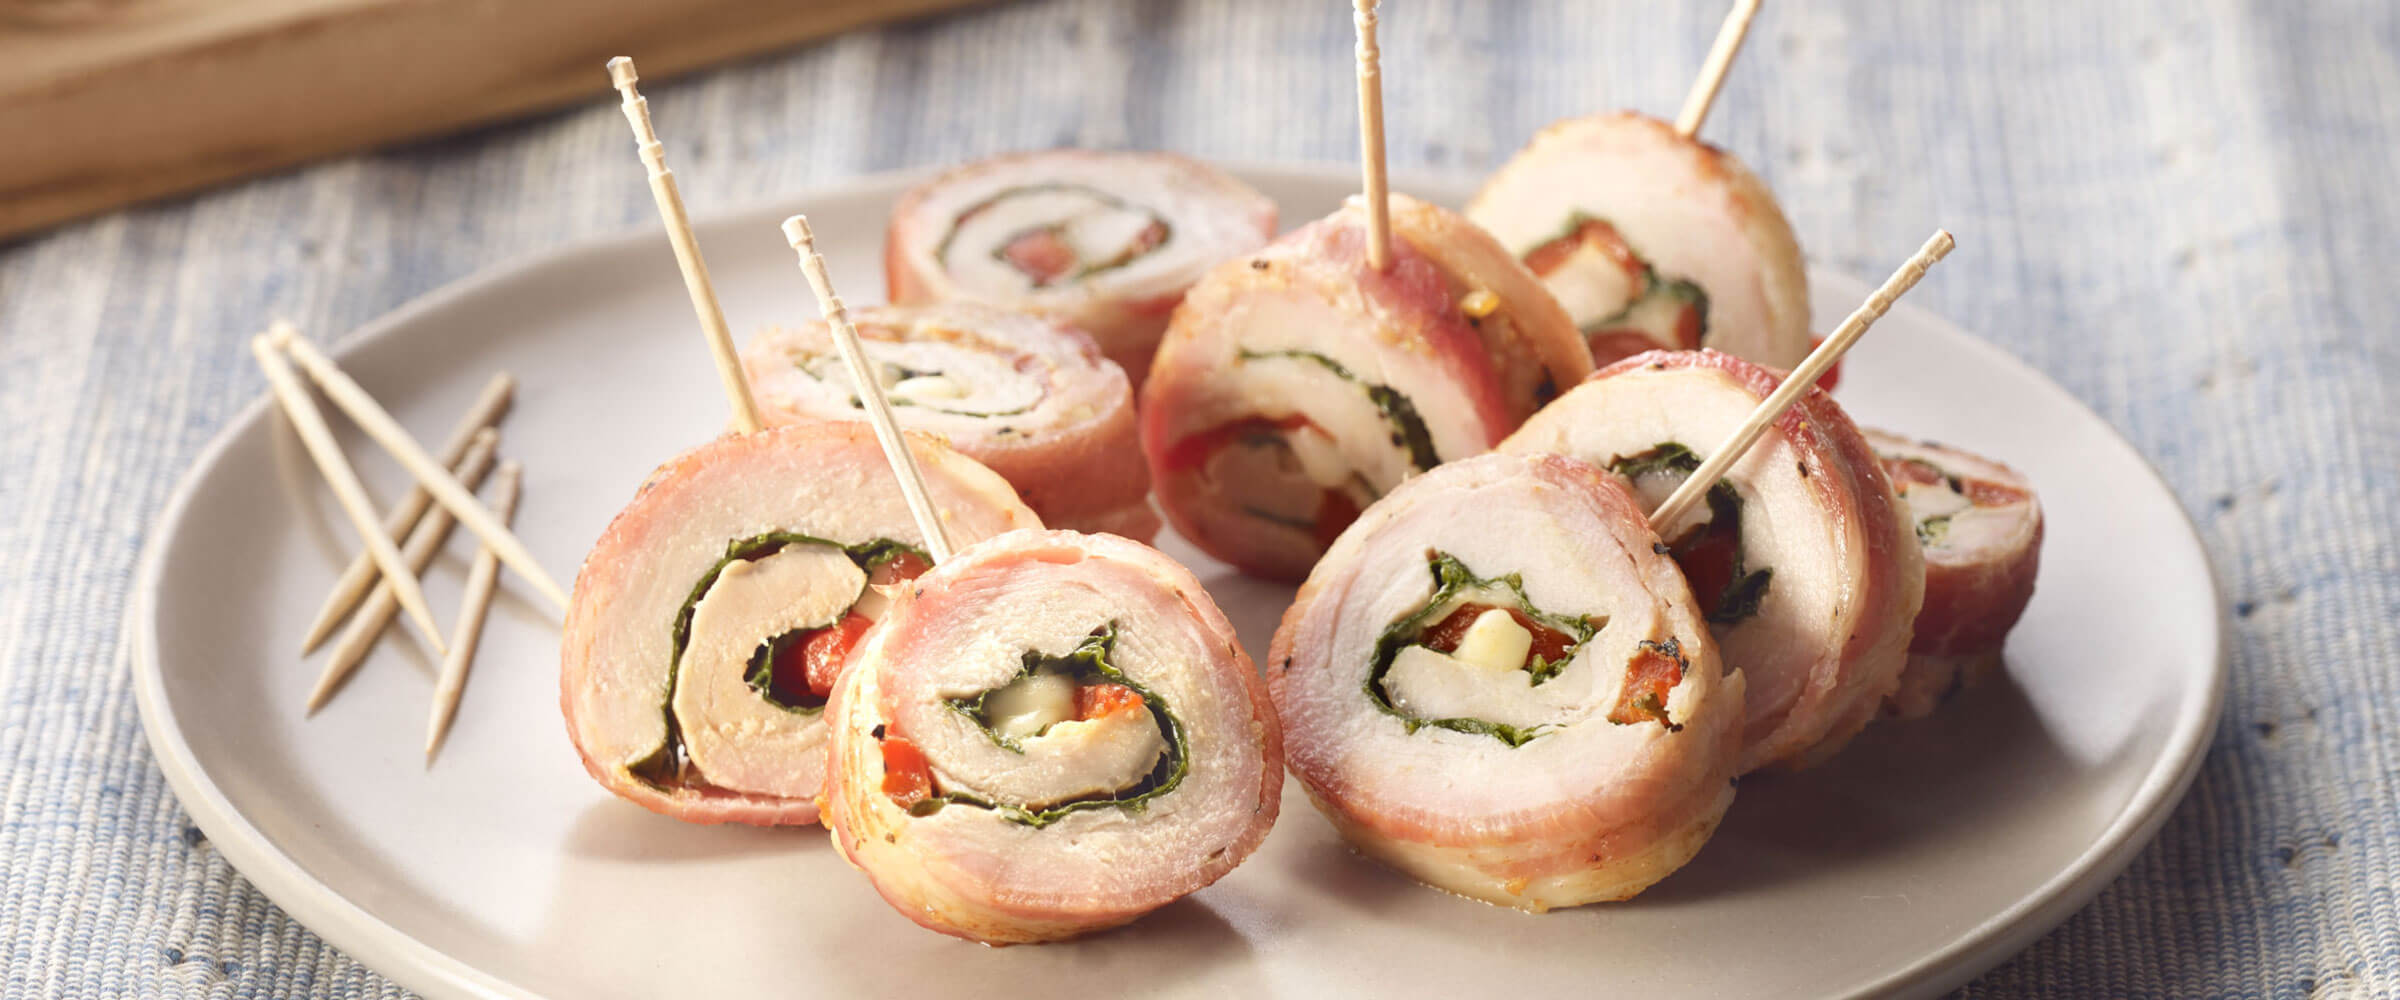 Bacon-Wrapped Pork Roll-Ups with toothpicks on plate on blue placemat